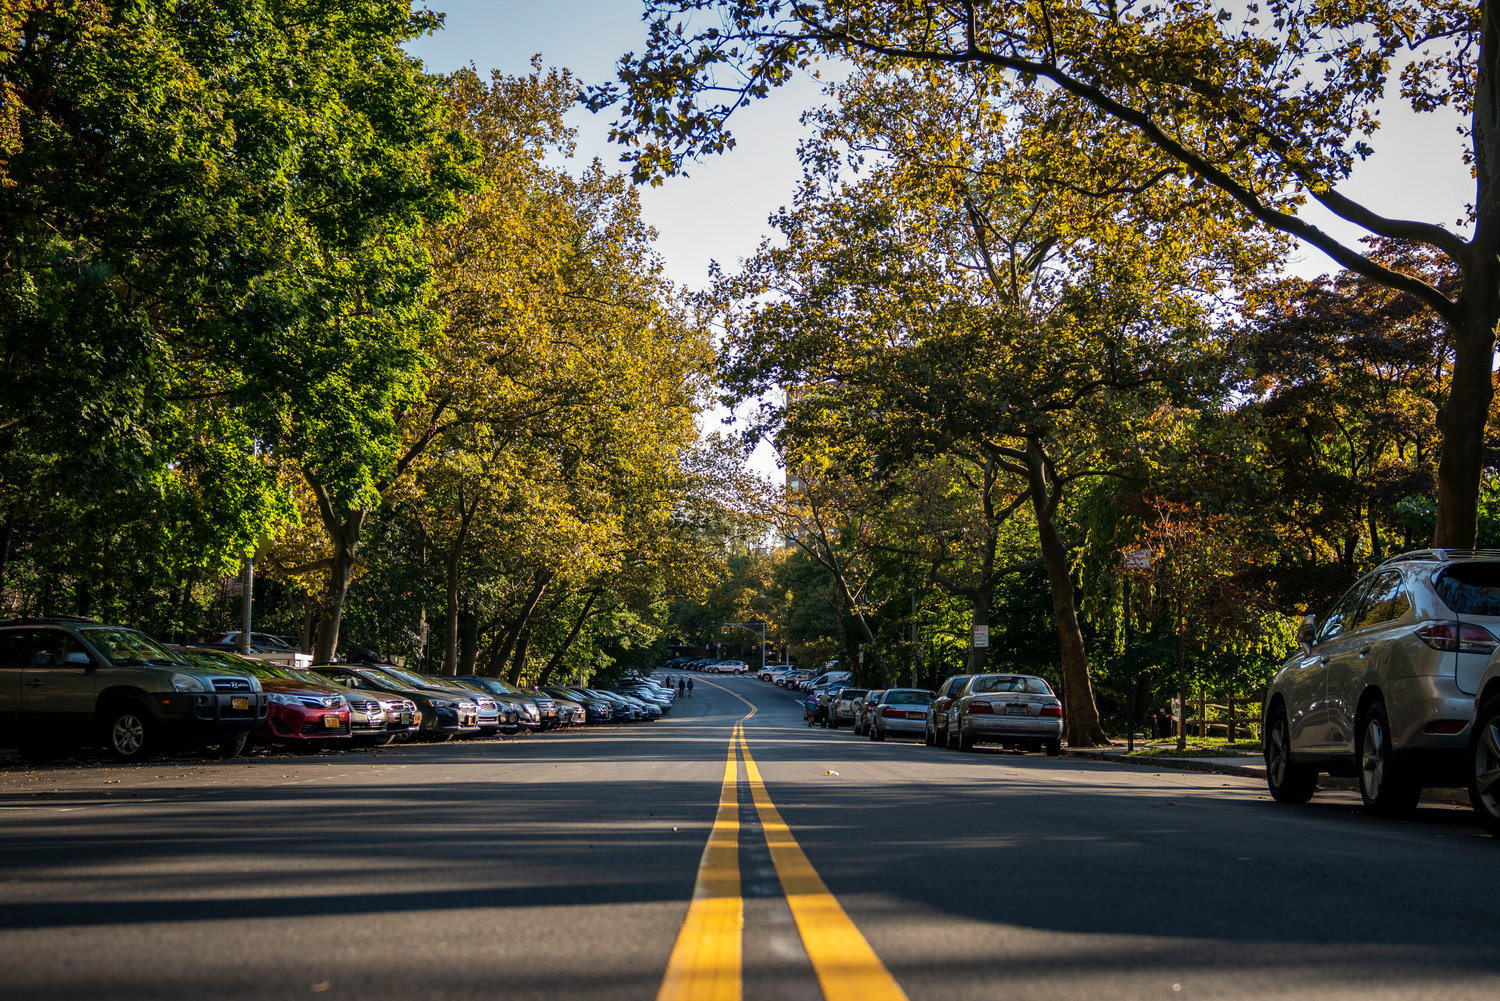 The long stretch of Independence Avenue goes from West 246th Street to West 232nd. Although speed bumps were recently reinstalled, Community Board 8 is considering recommending further changes to the area as drag racing in the neighborhood persists.